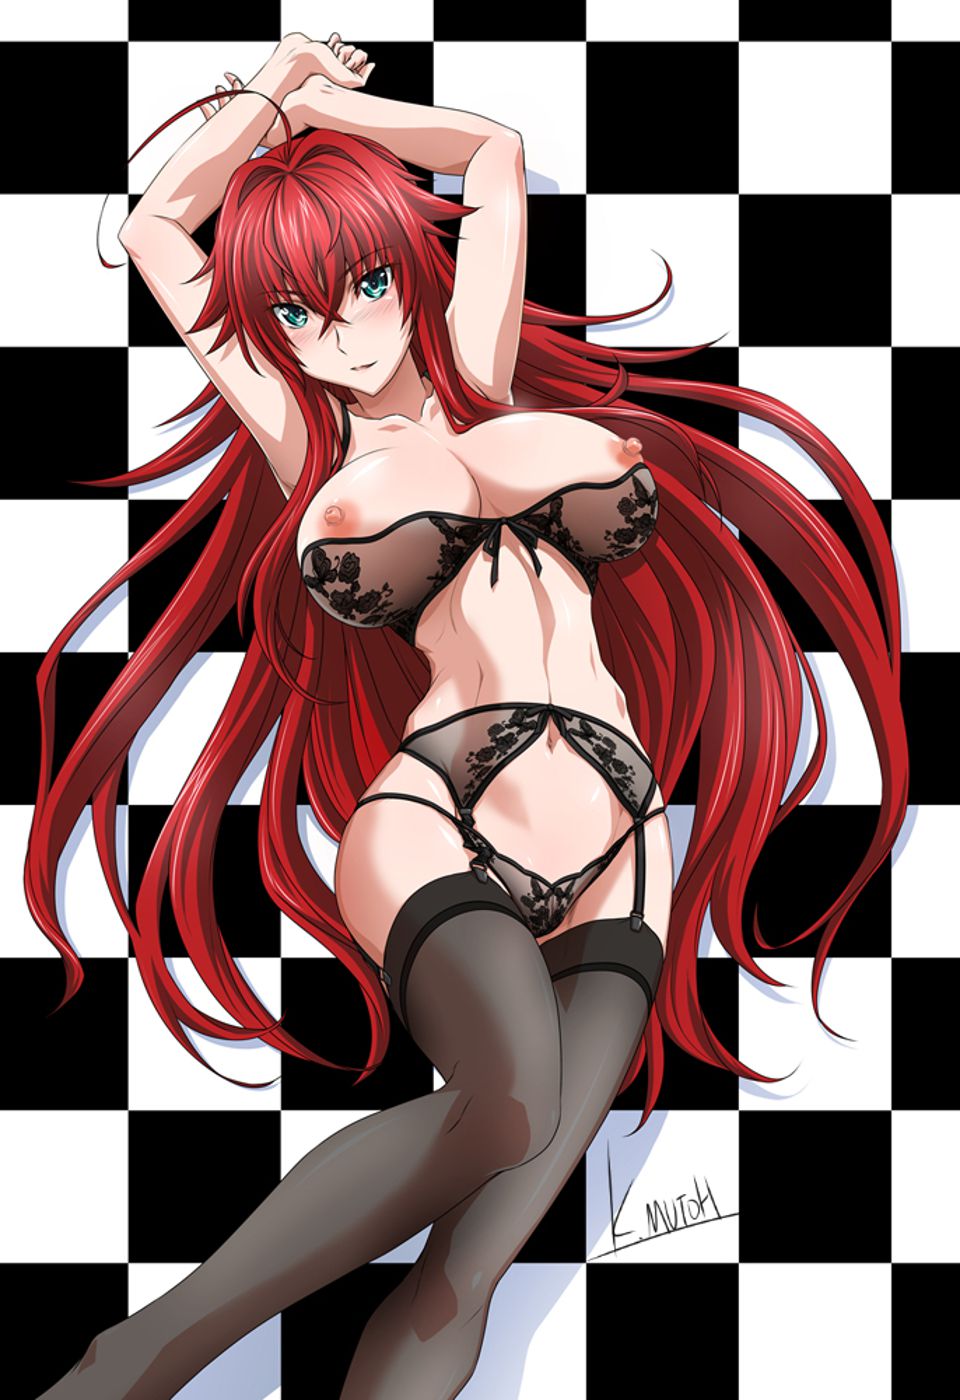 [Erocola Character Material] PNG background transparent erotic image material, such as anime characters Part 263 19